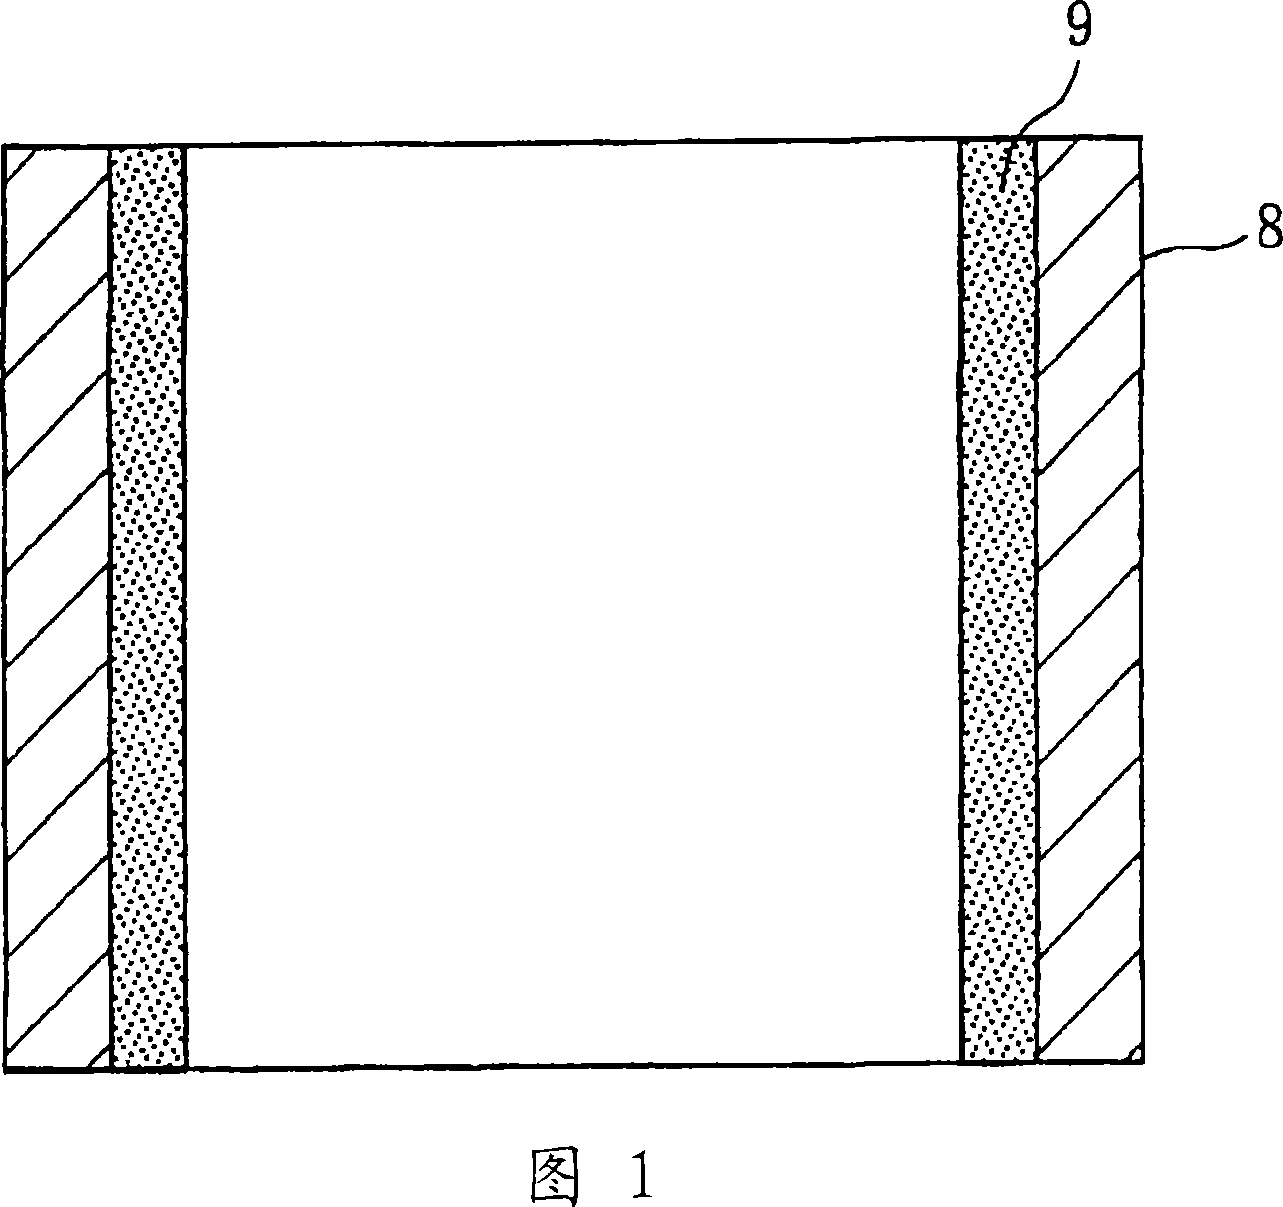 Endless belt and method for manufacturing same